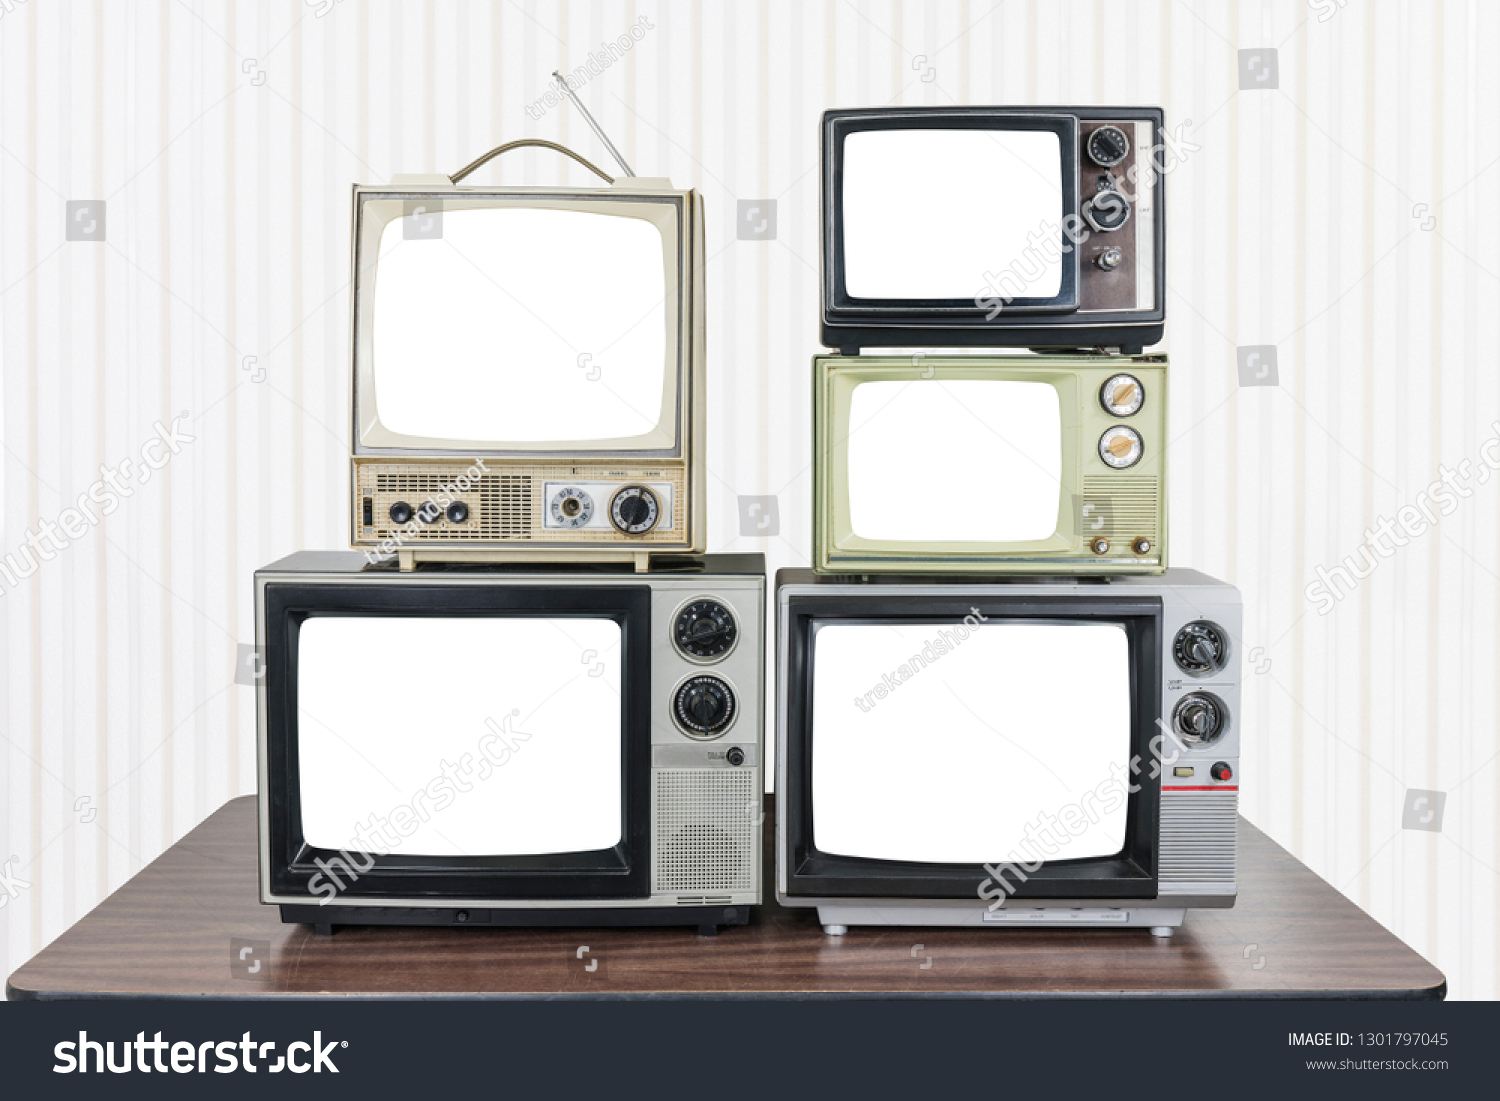 Five vintage televisions on old wood table with cut out screens. #1301797045